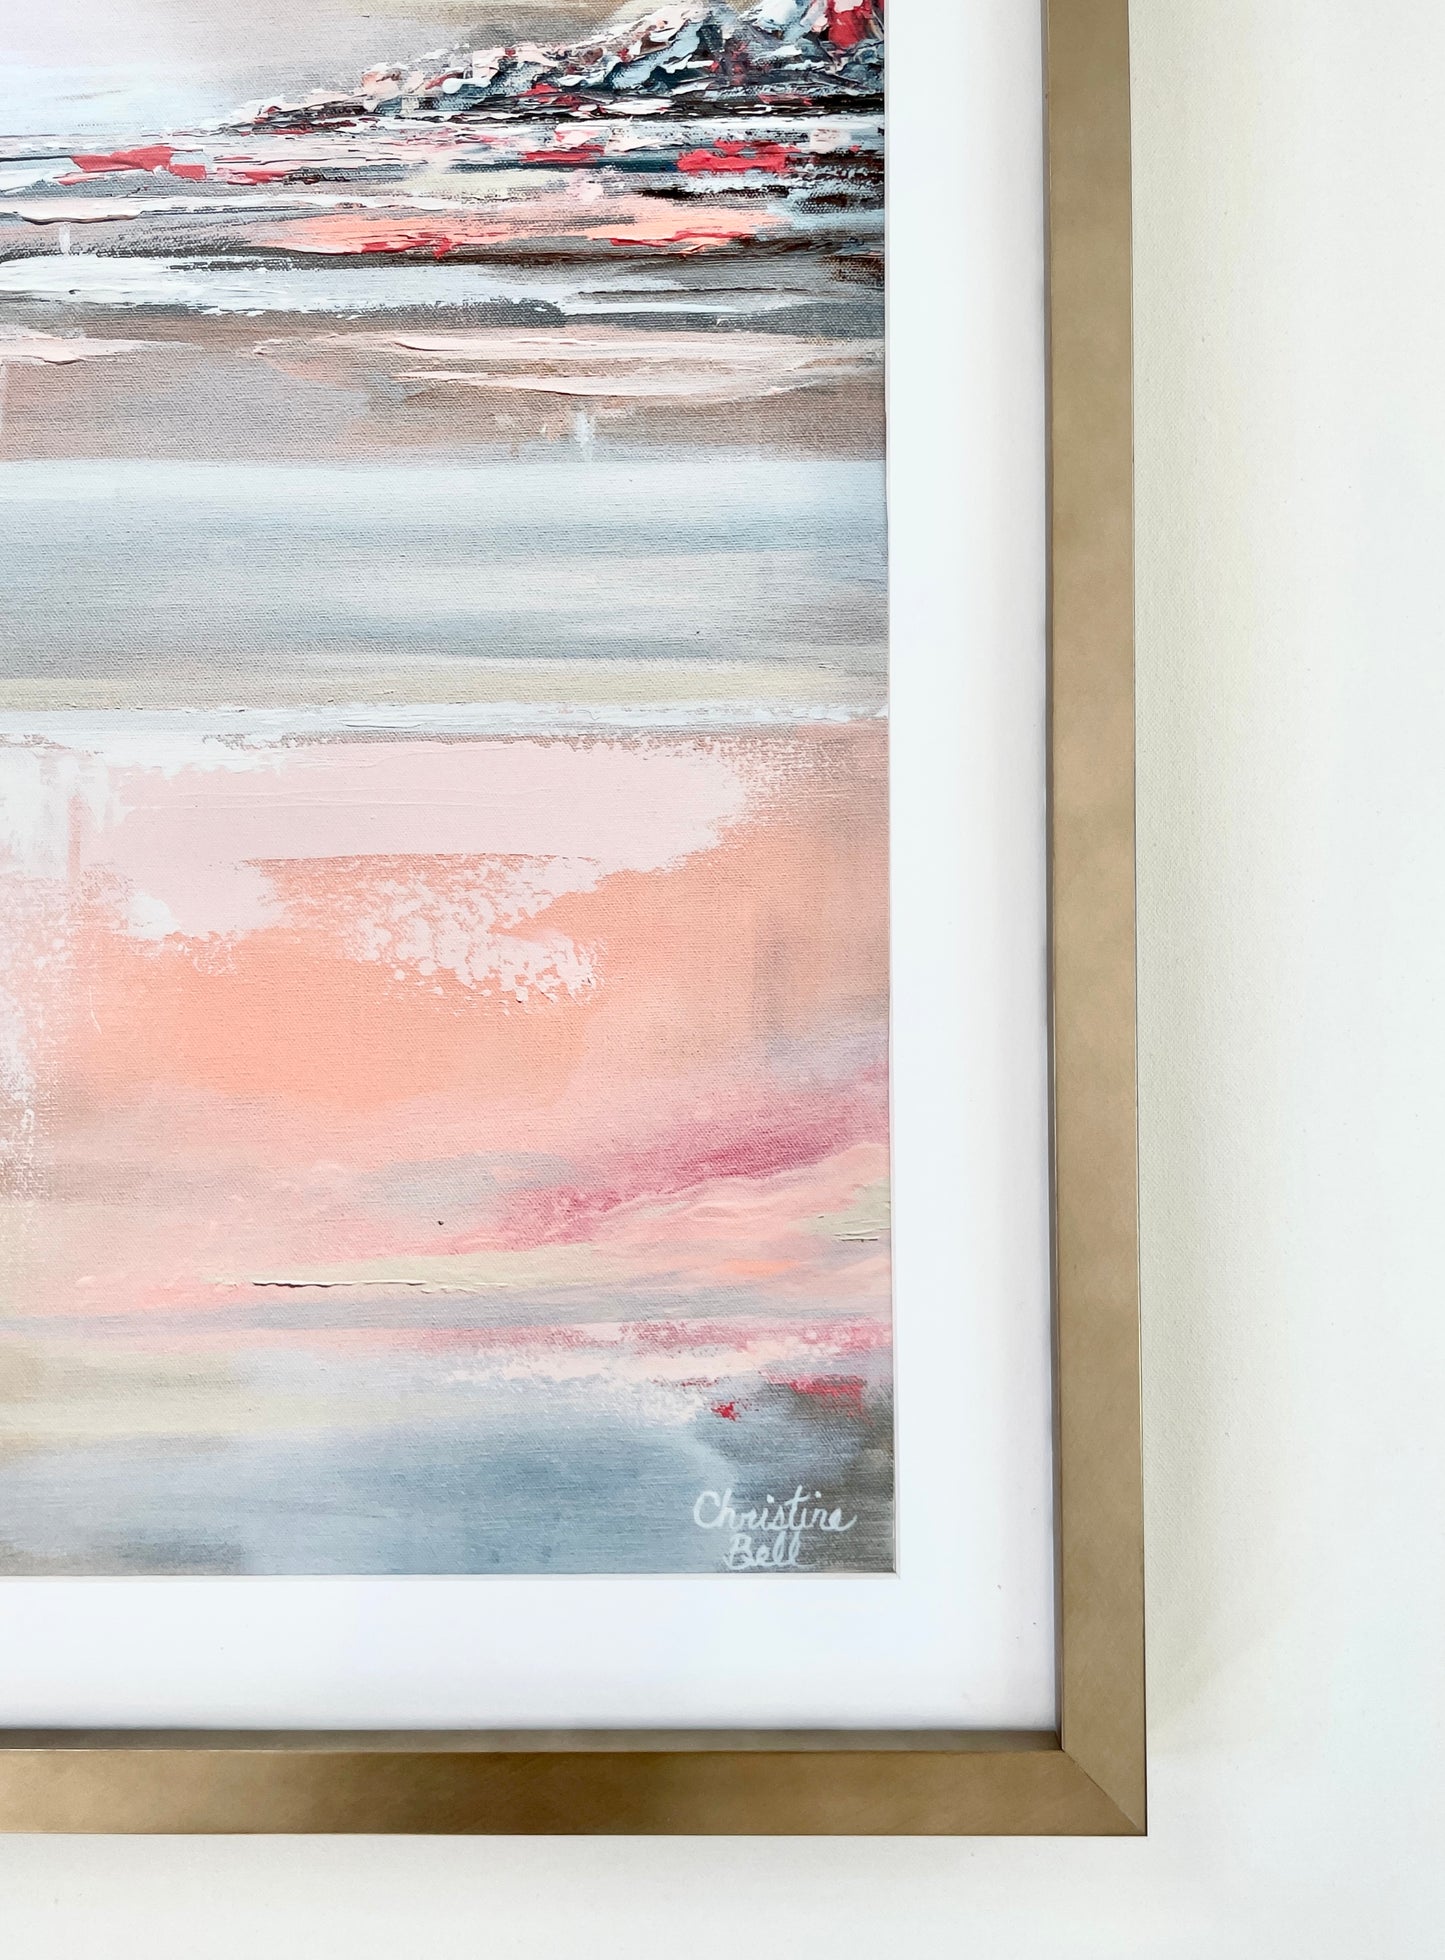 "Romantic Impressions" FRAMED GICLEE PRINT Art Pink White Grey Beige Coastal Abstract Painting Modern Wall Art